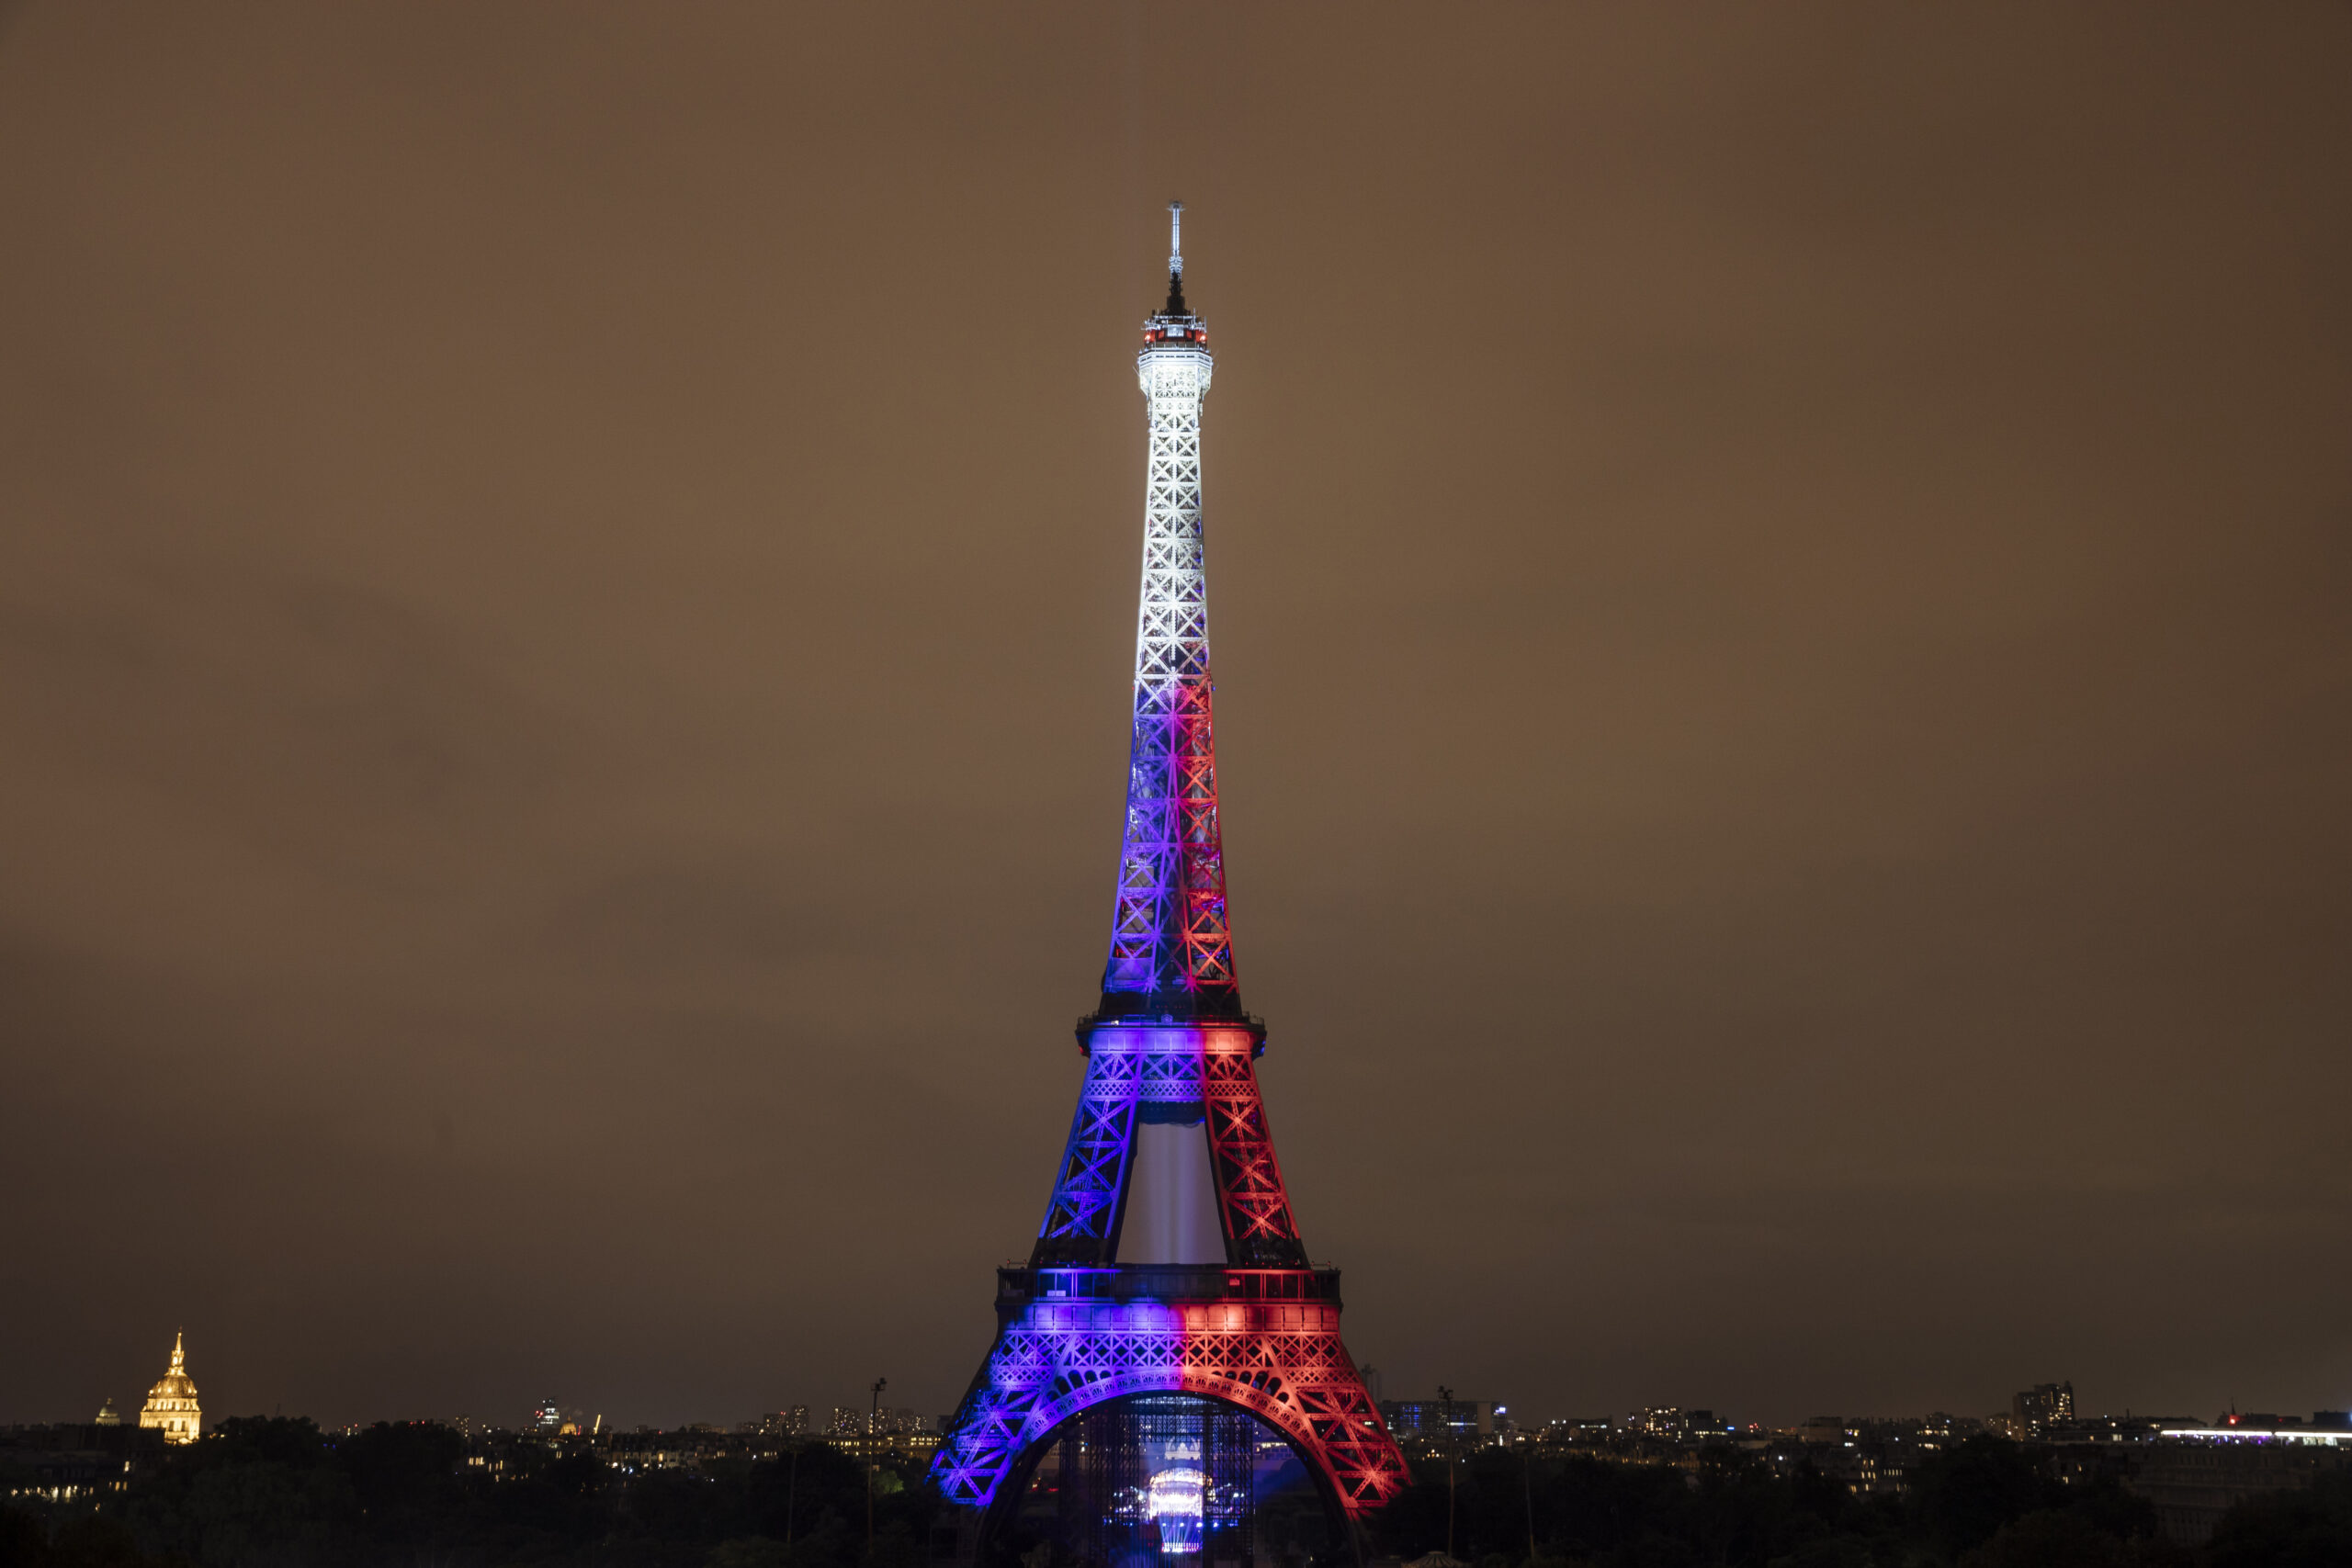 Fireworks illuminate the Eiffel Tower in Paris during Bastille Day celebrations late Wednesday, July 14, 2021. France celebrated its national holiday Wednesday with thousands of troops marching in a Paris parade, after last year's events were scaled back because of COVID-19 virus fears. (AP Photo/Lewis Joly)